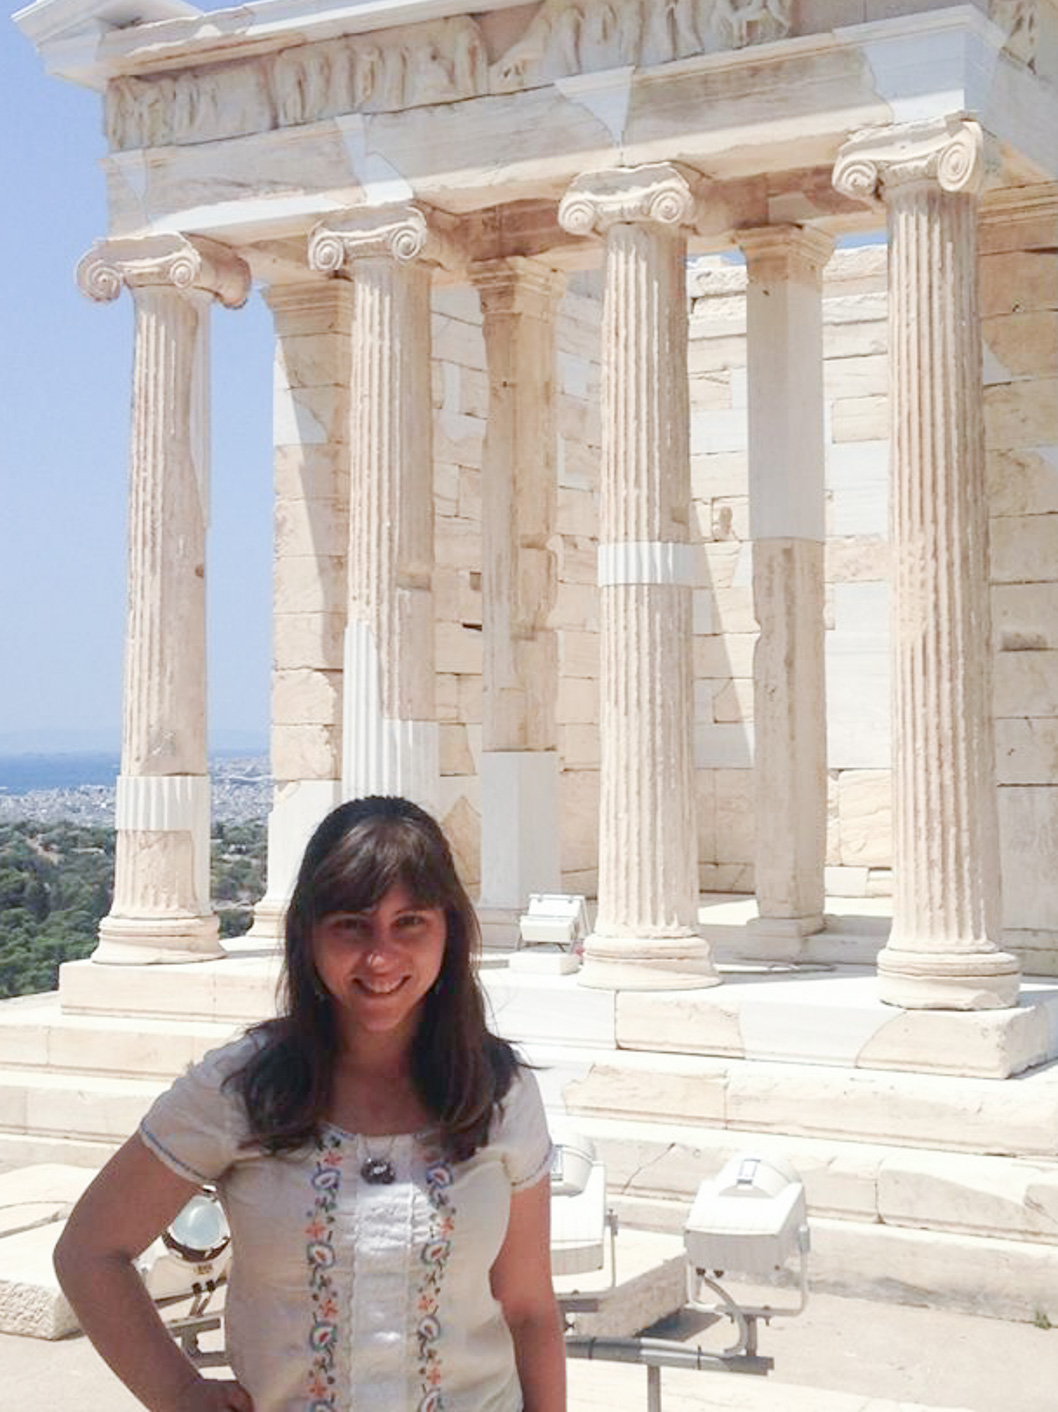 Talia Chicherio, a Latin teacher at McLean, posing in front of ancient Greek columns in Athens